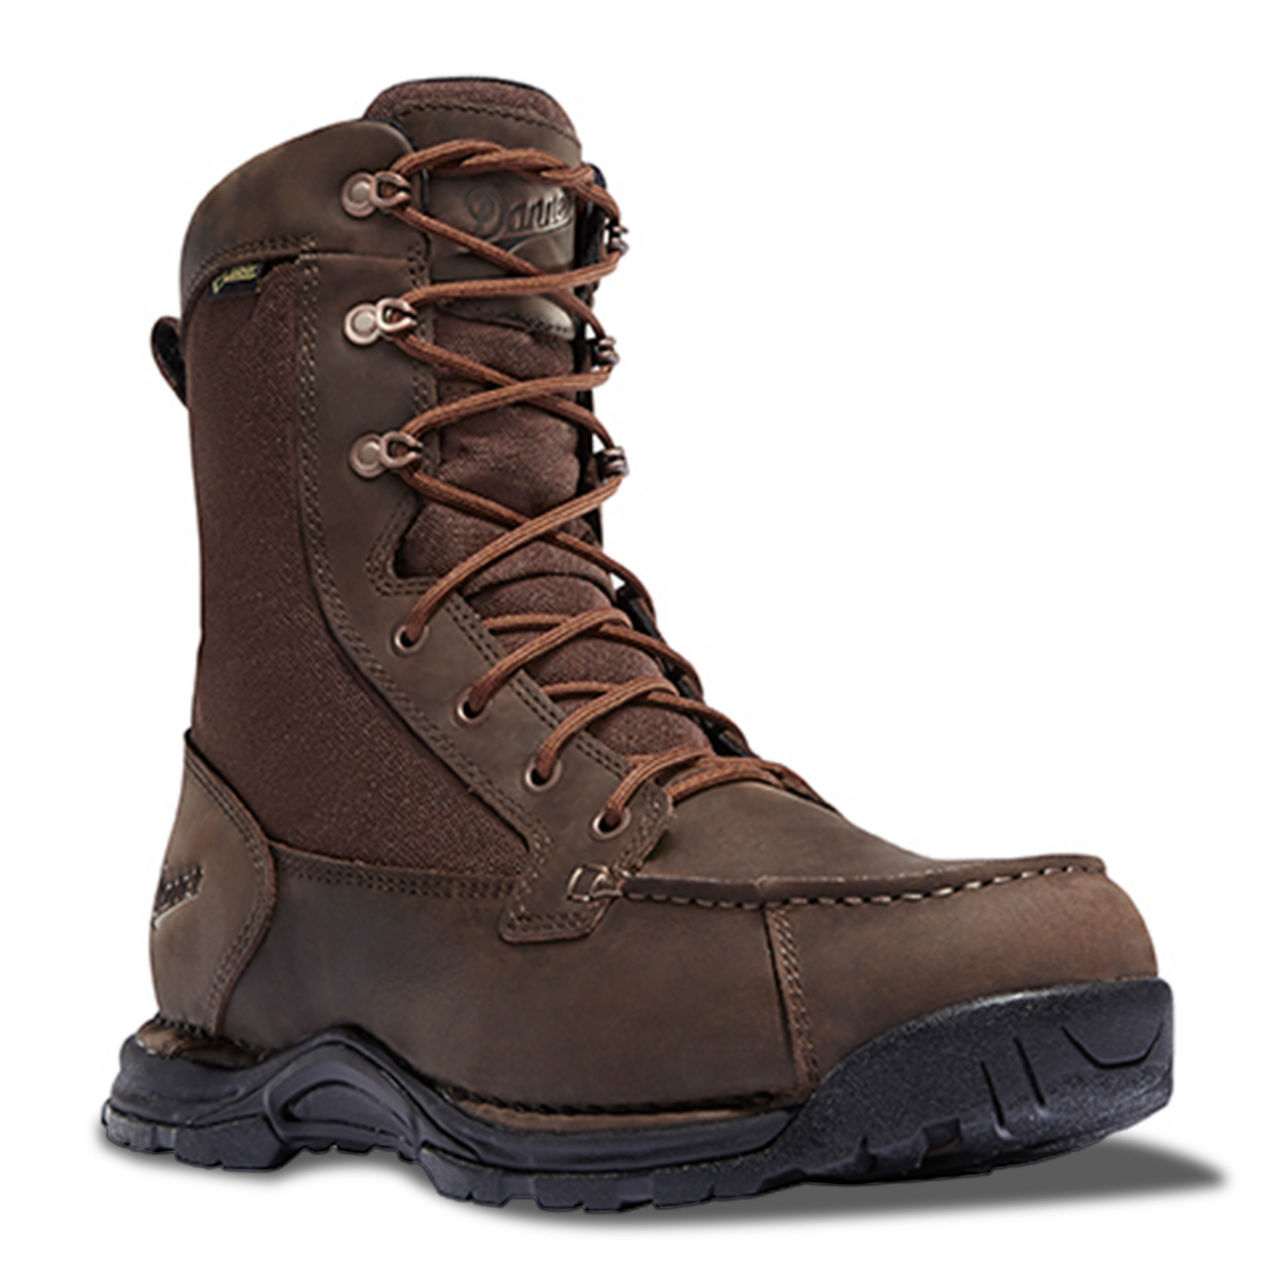 Danner Sharptail 8" GTX Boots - BROWN image number 0